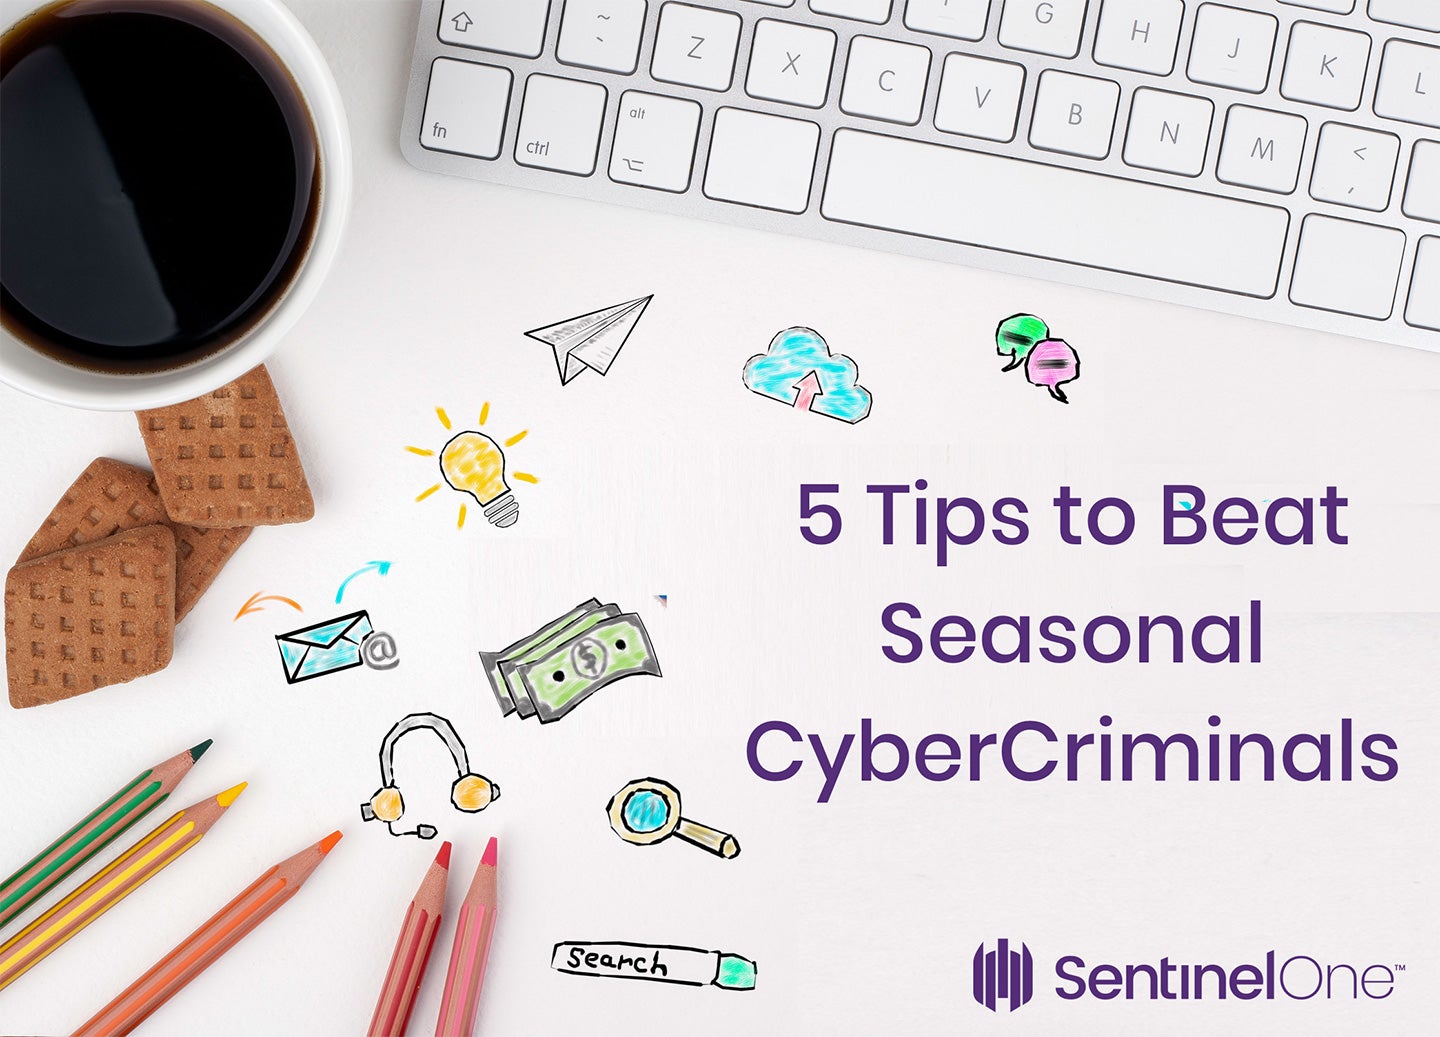 An overview image SentinelOne created of a desk with colorful pencils, dribbles, a coffee mug, and a Mac's keyboard, with the title 5 tips to beat seasonal cybercriminals on top. 